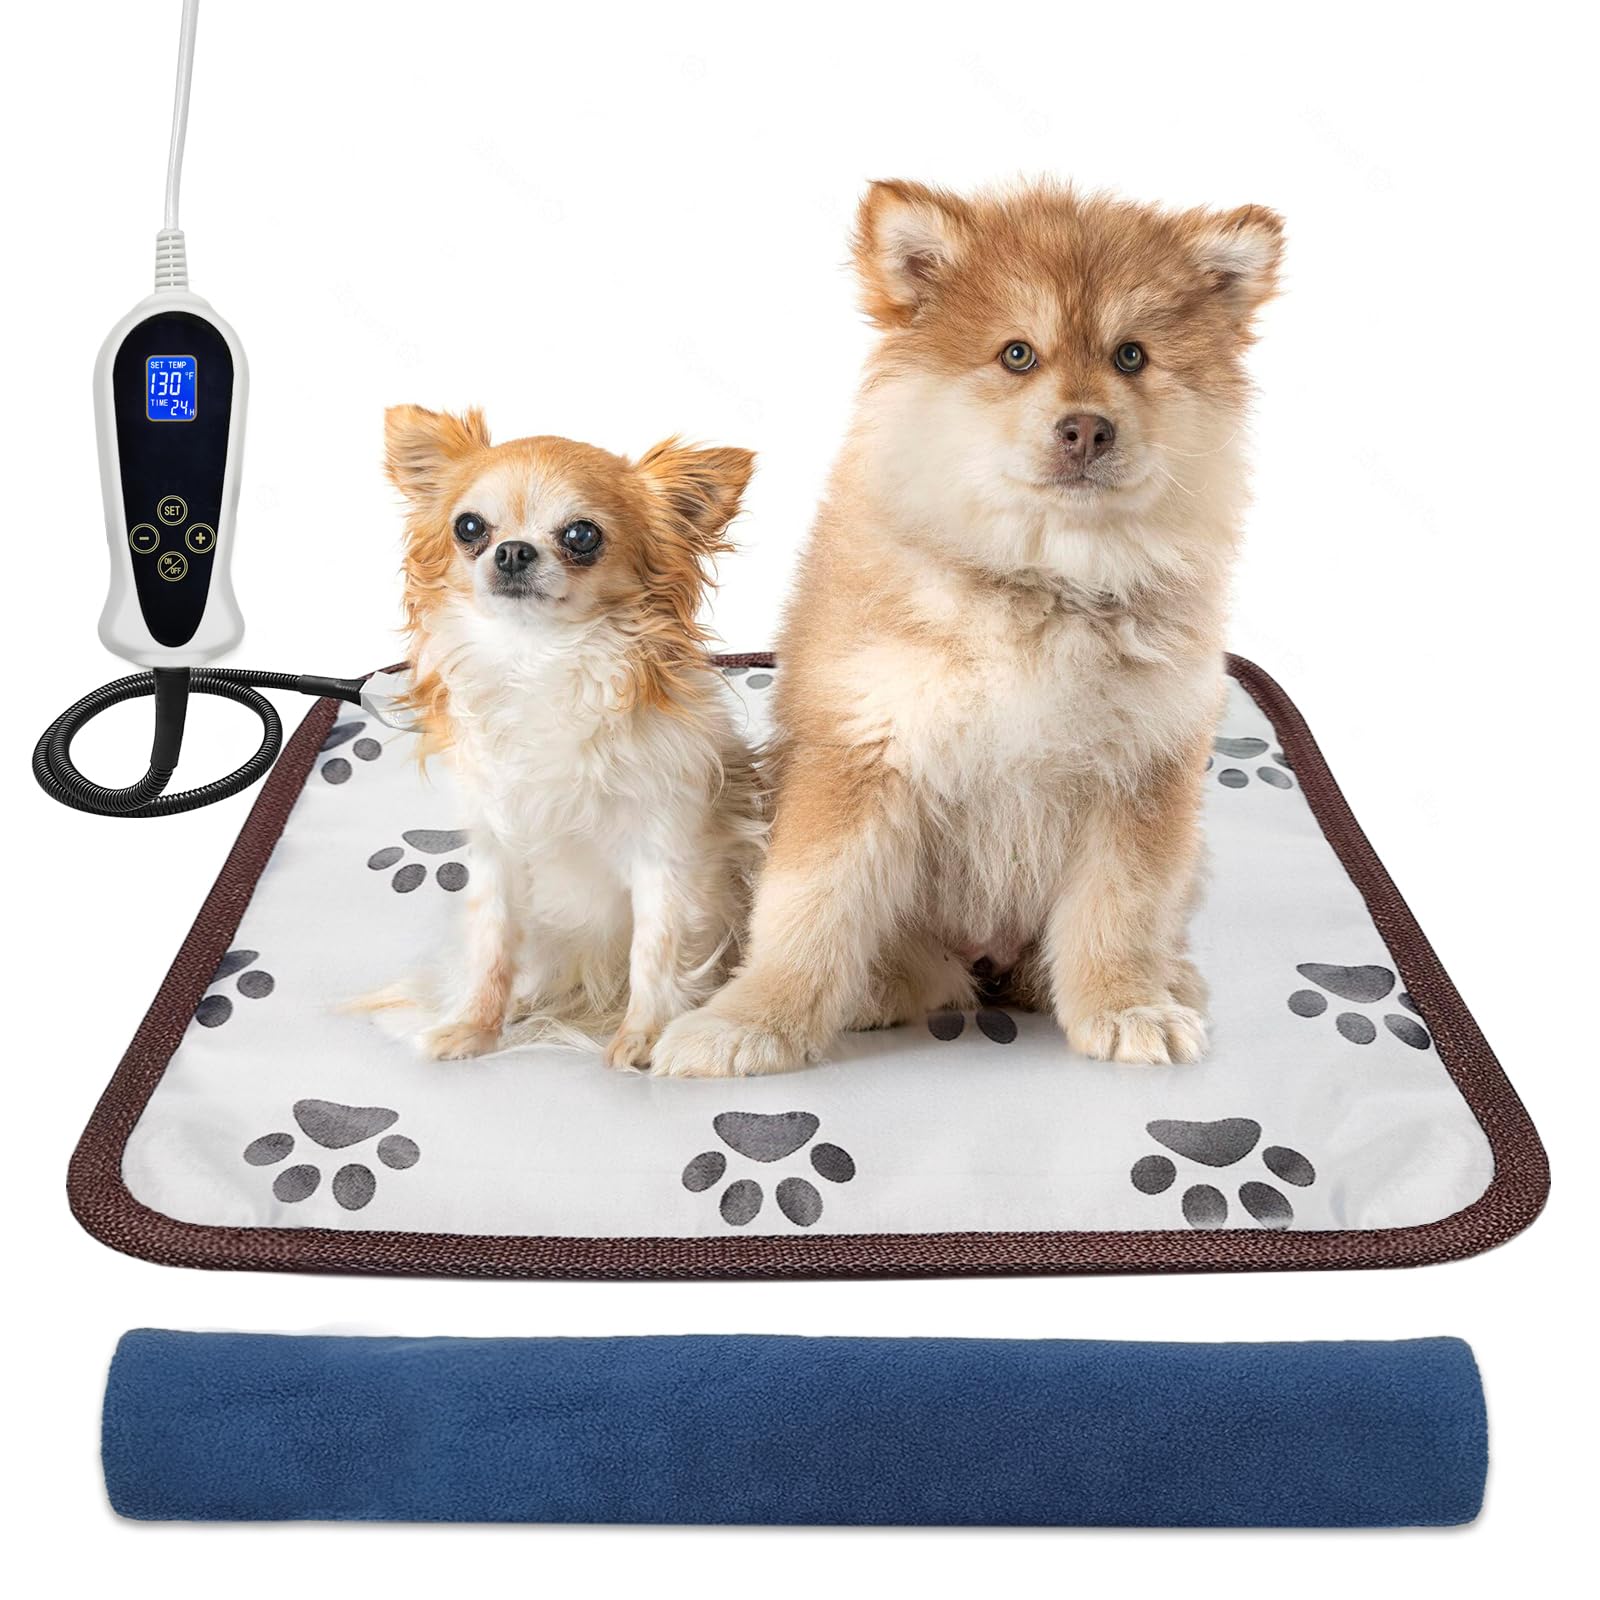 Bestio cat Heating pad,Medium 18x18 inches Dog Heating Pad,Electric pet Heated pad with Adjustable Thermostat and chew Resistant